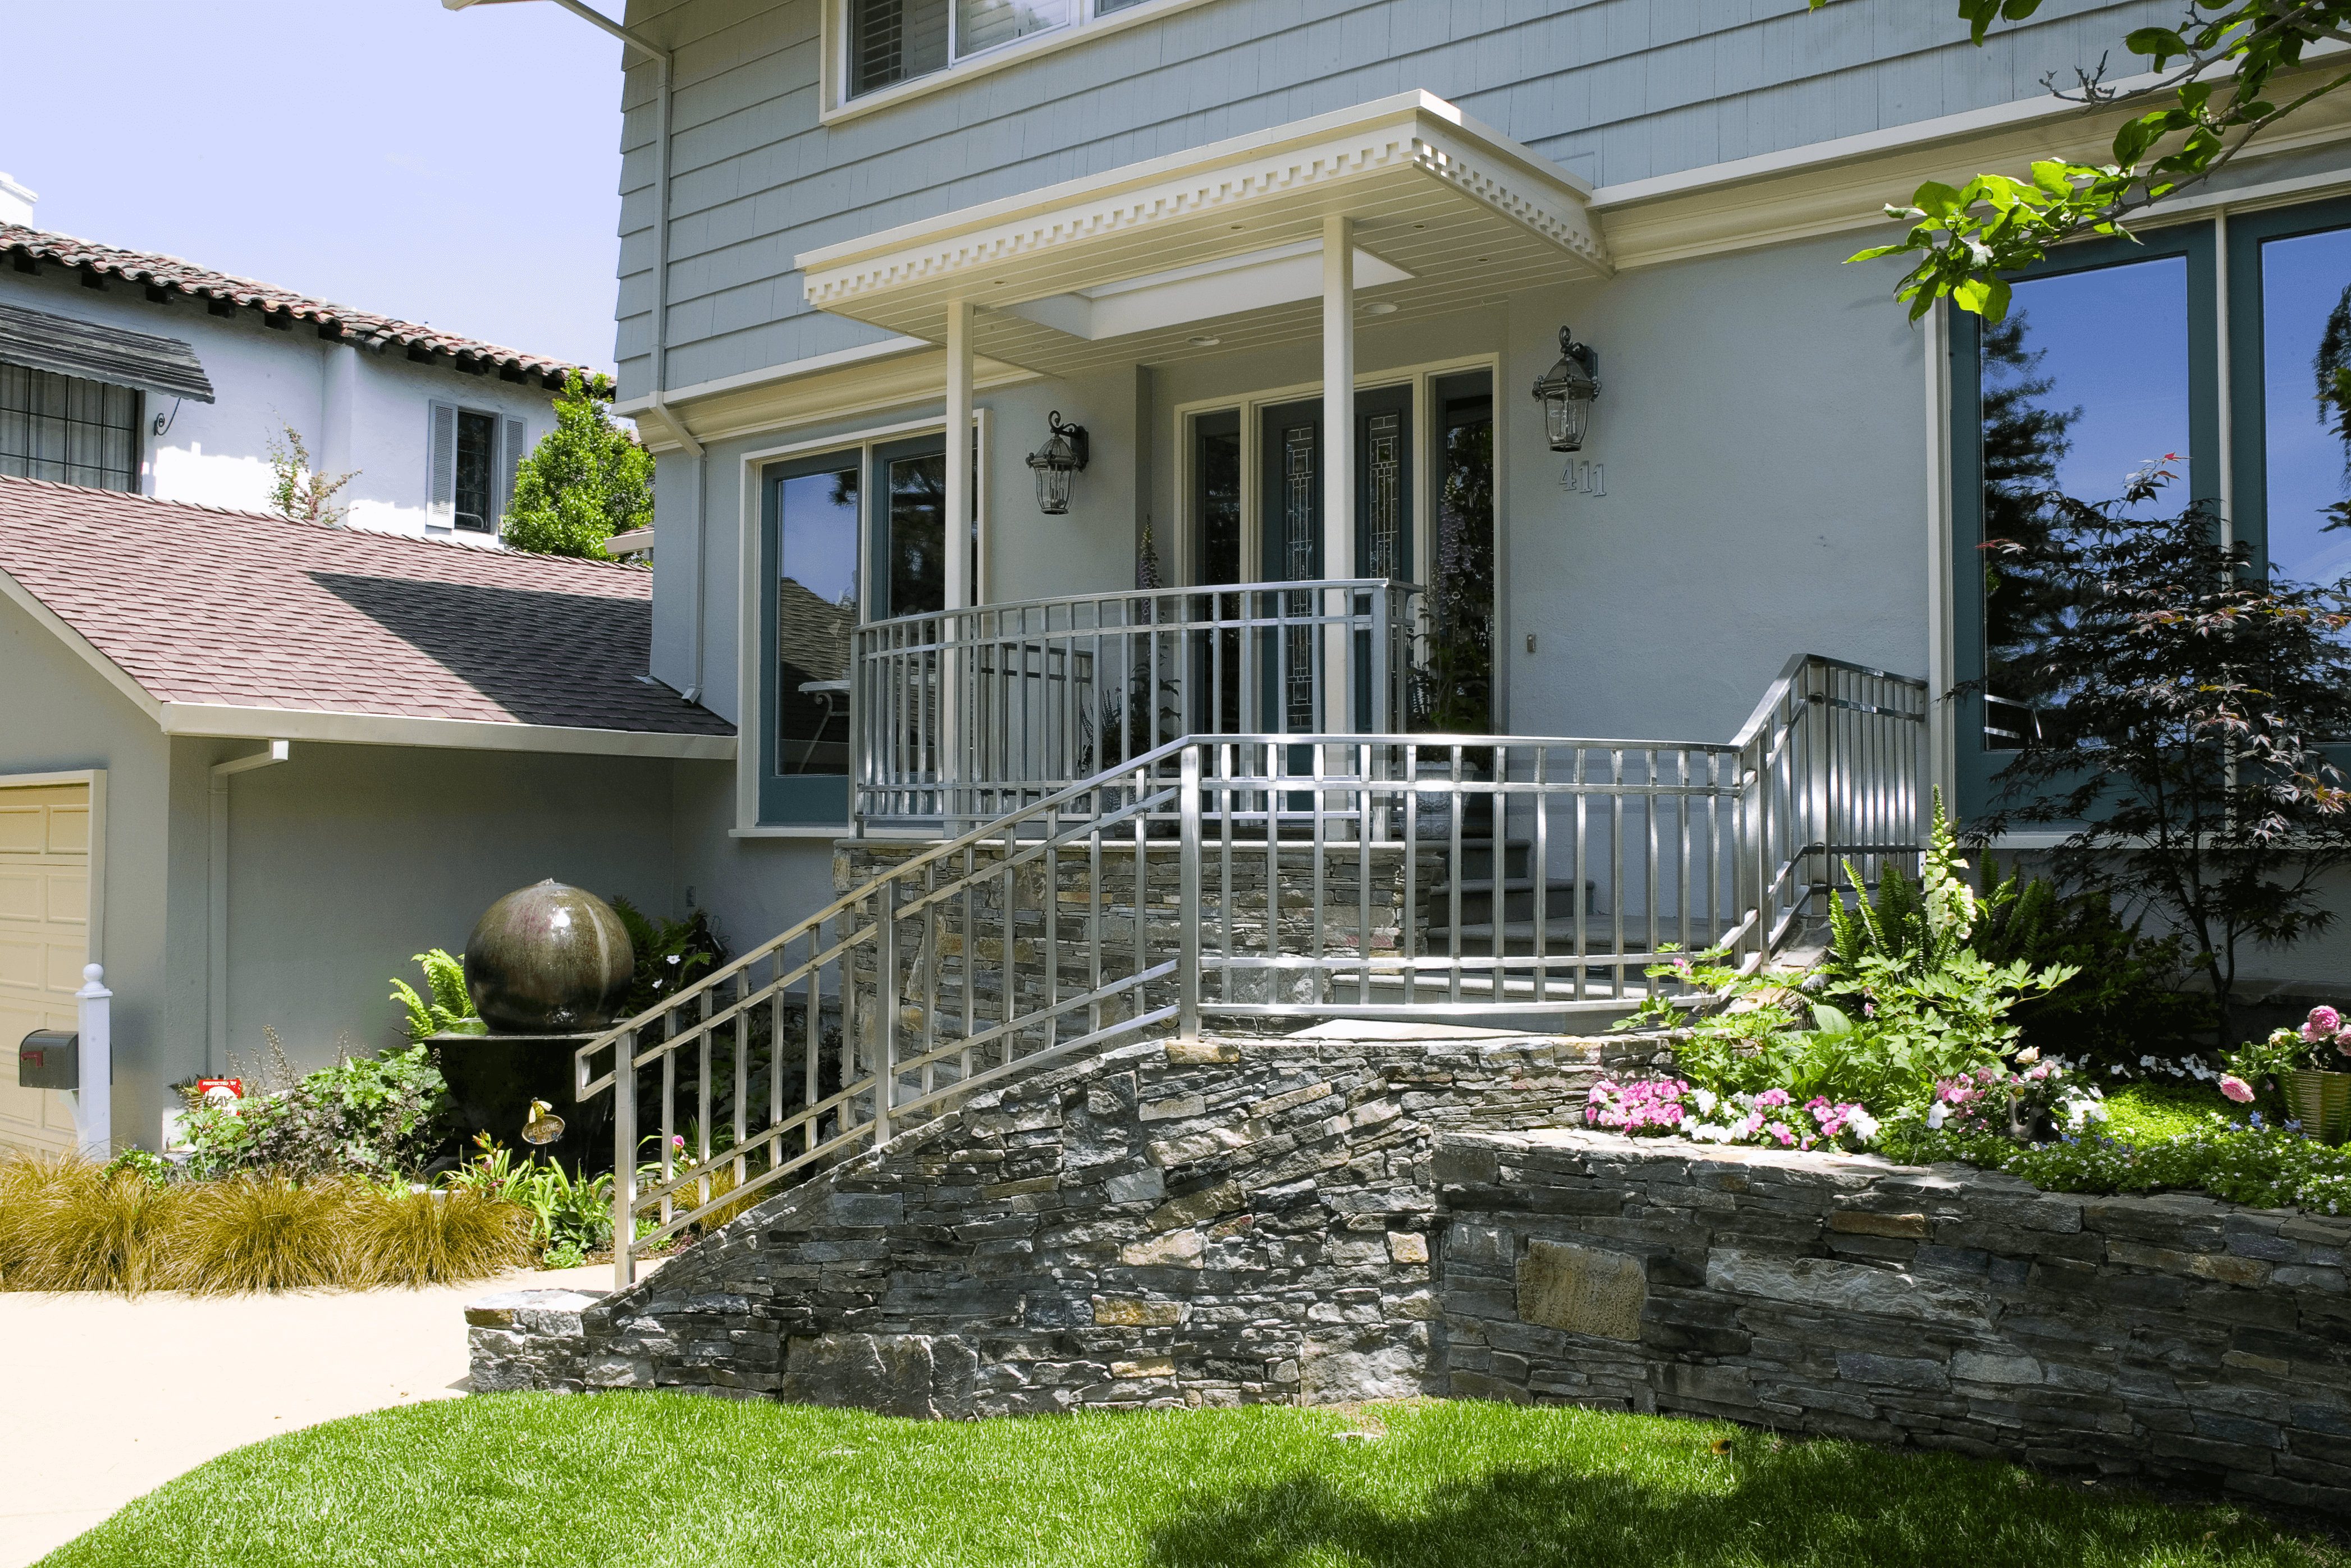 Stacked stone wall surrounding staircase leading to home front door